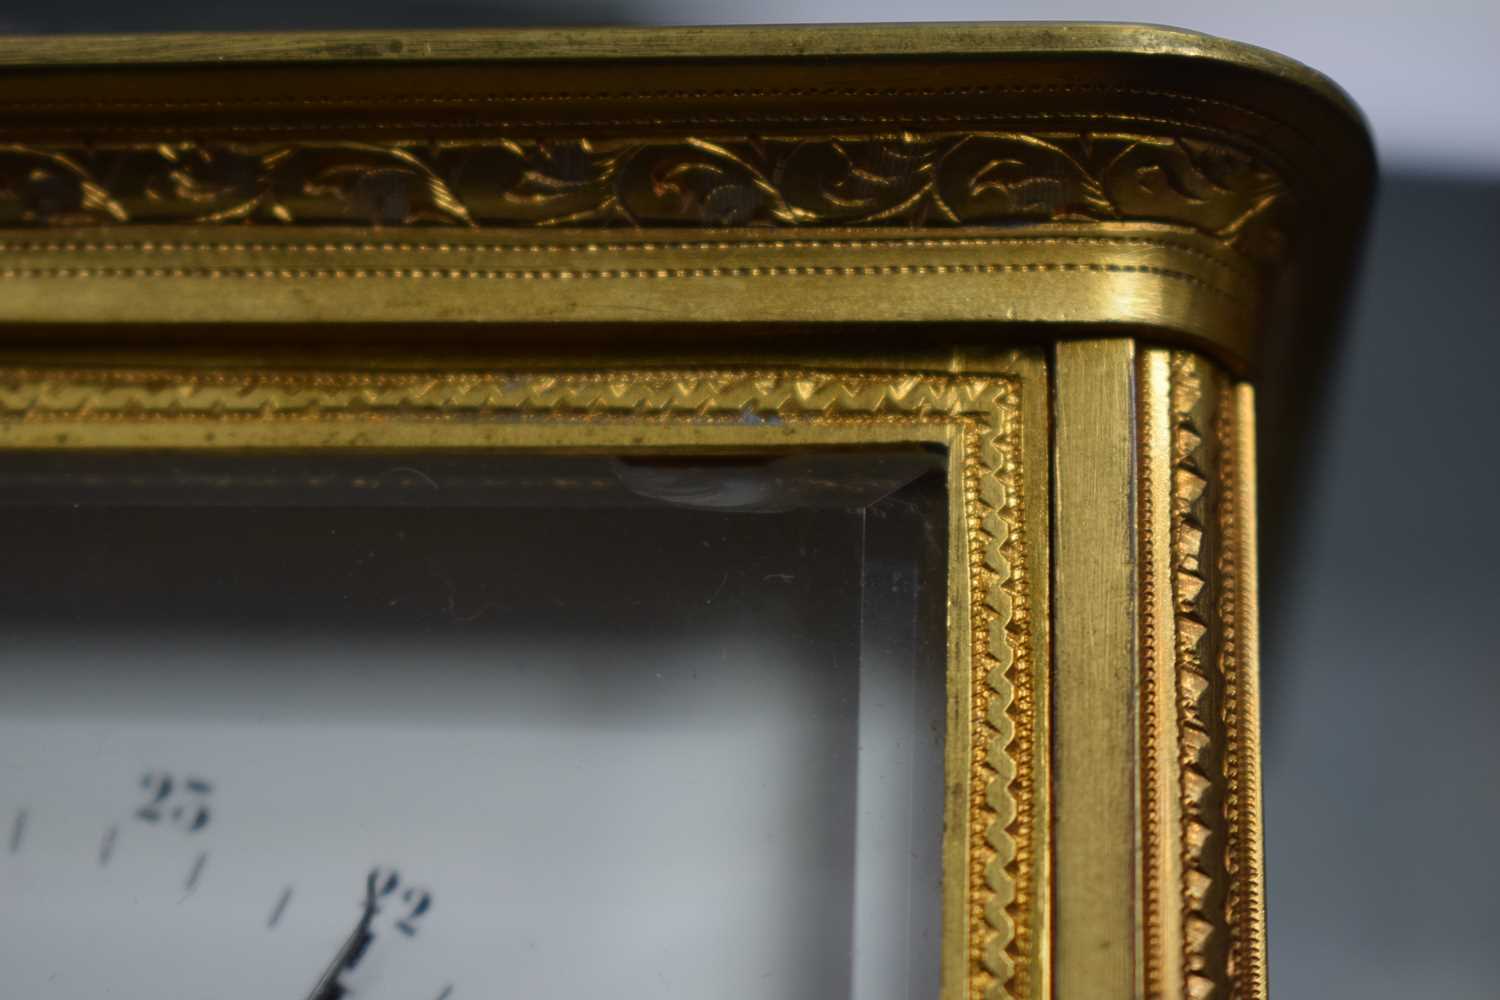 A LARGE ANTIQUE FRENCH CARRIAGE CLOCK with finely engraved case. 22.5 cm high inc handle. - Image 13 of 15